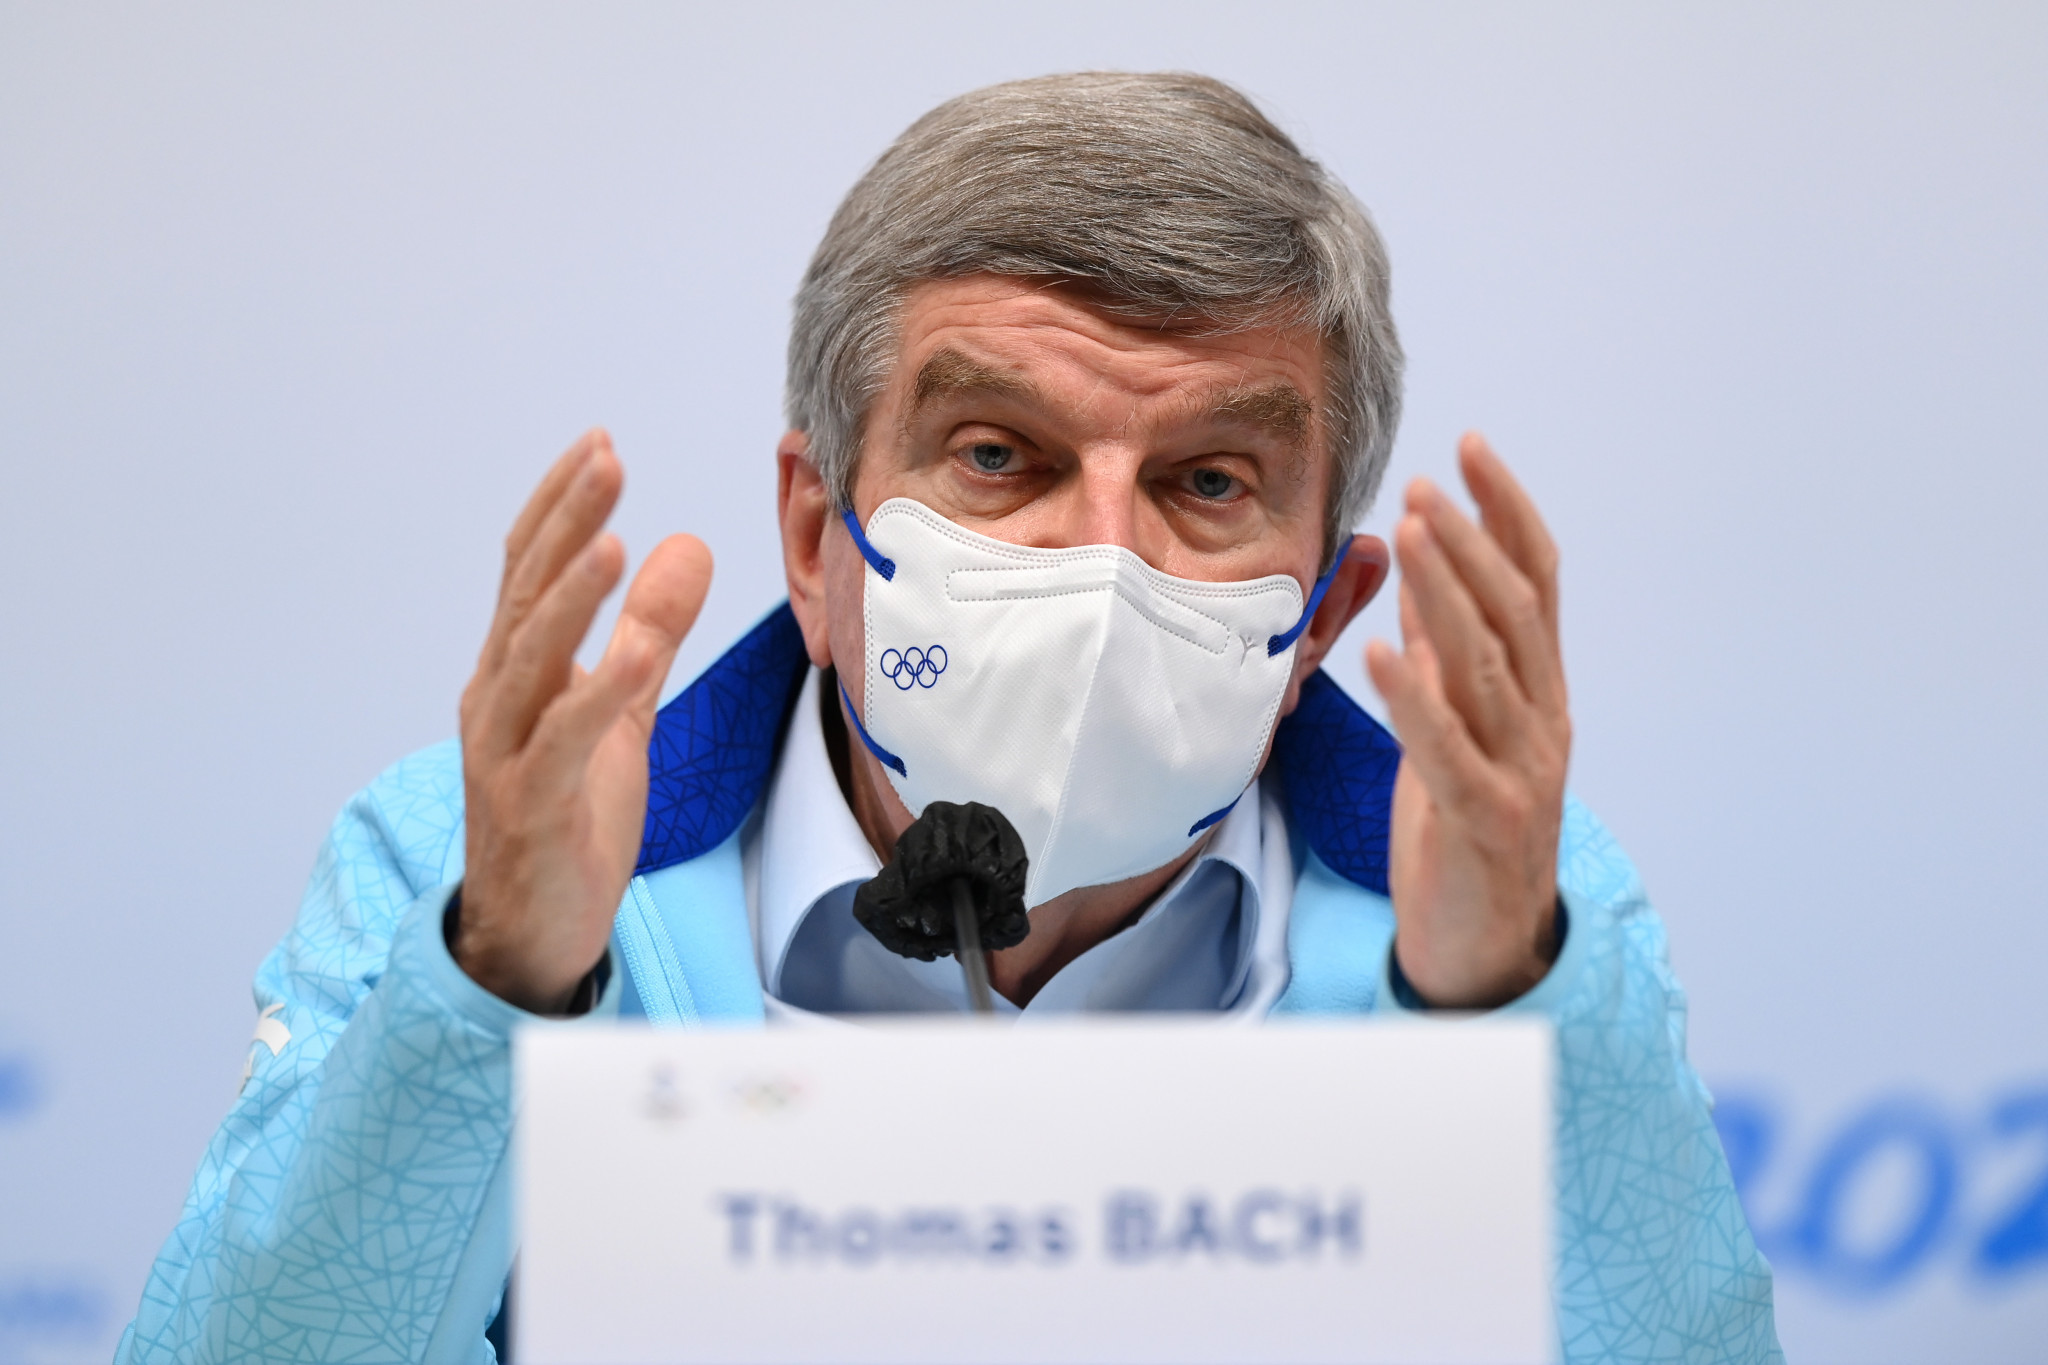 IOC President Thomas Bach has justified the recommendation to exclude athletes from Belarus and Russia ©Getty Images